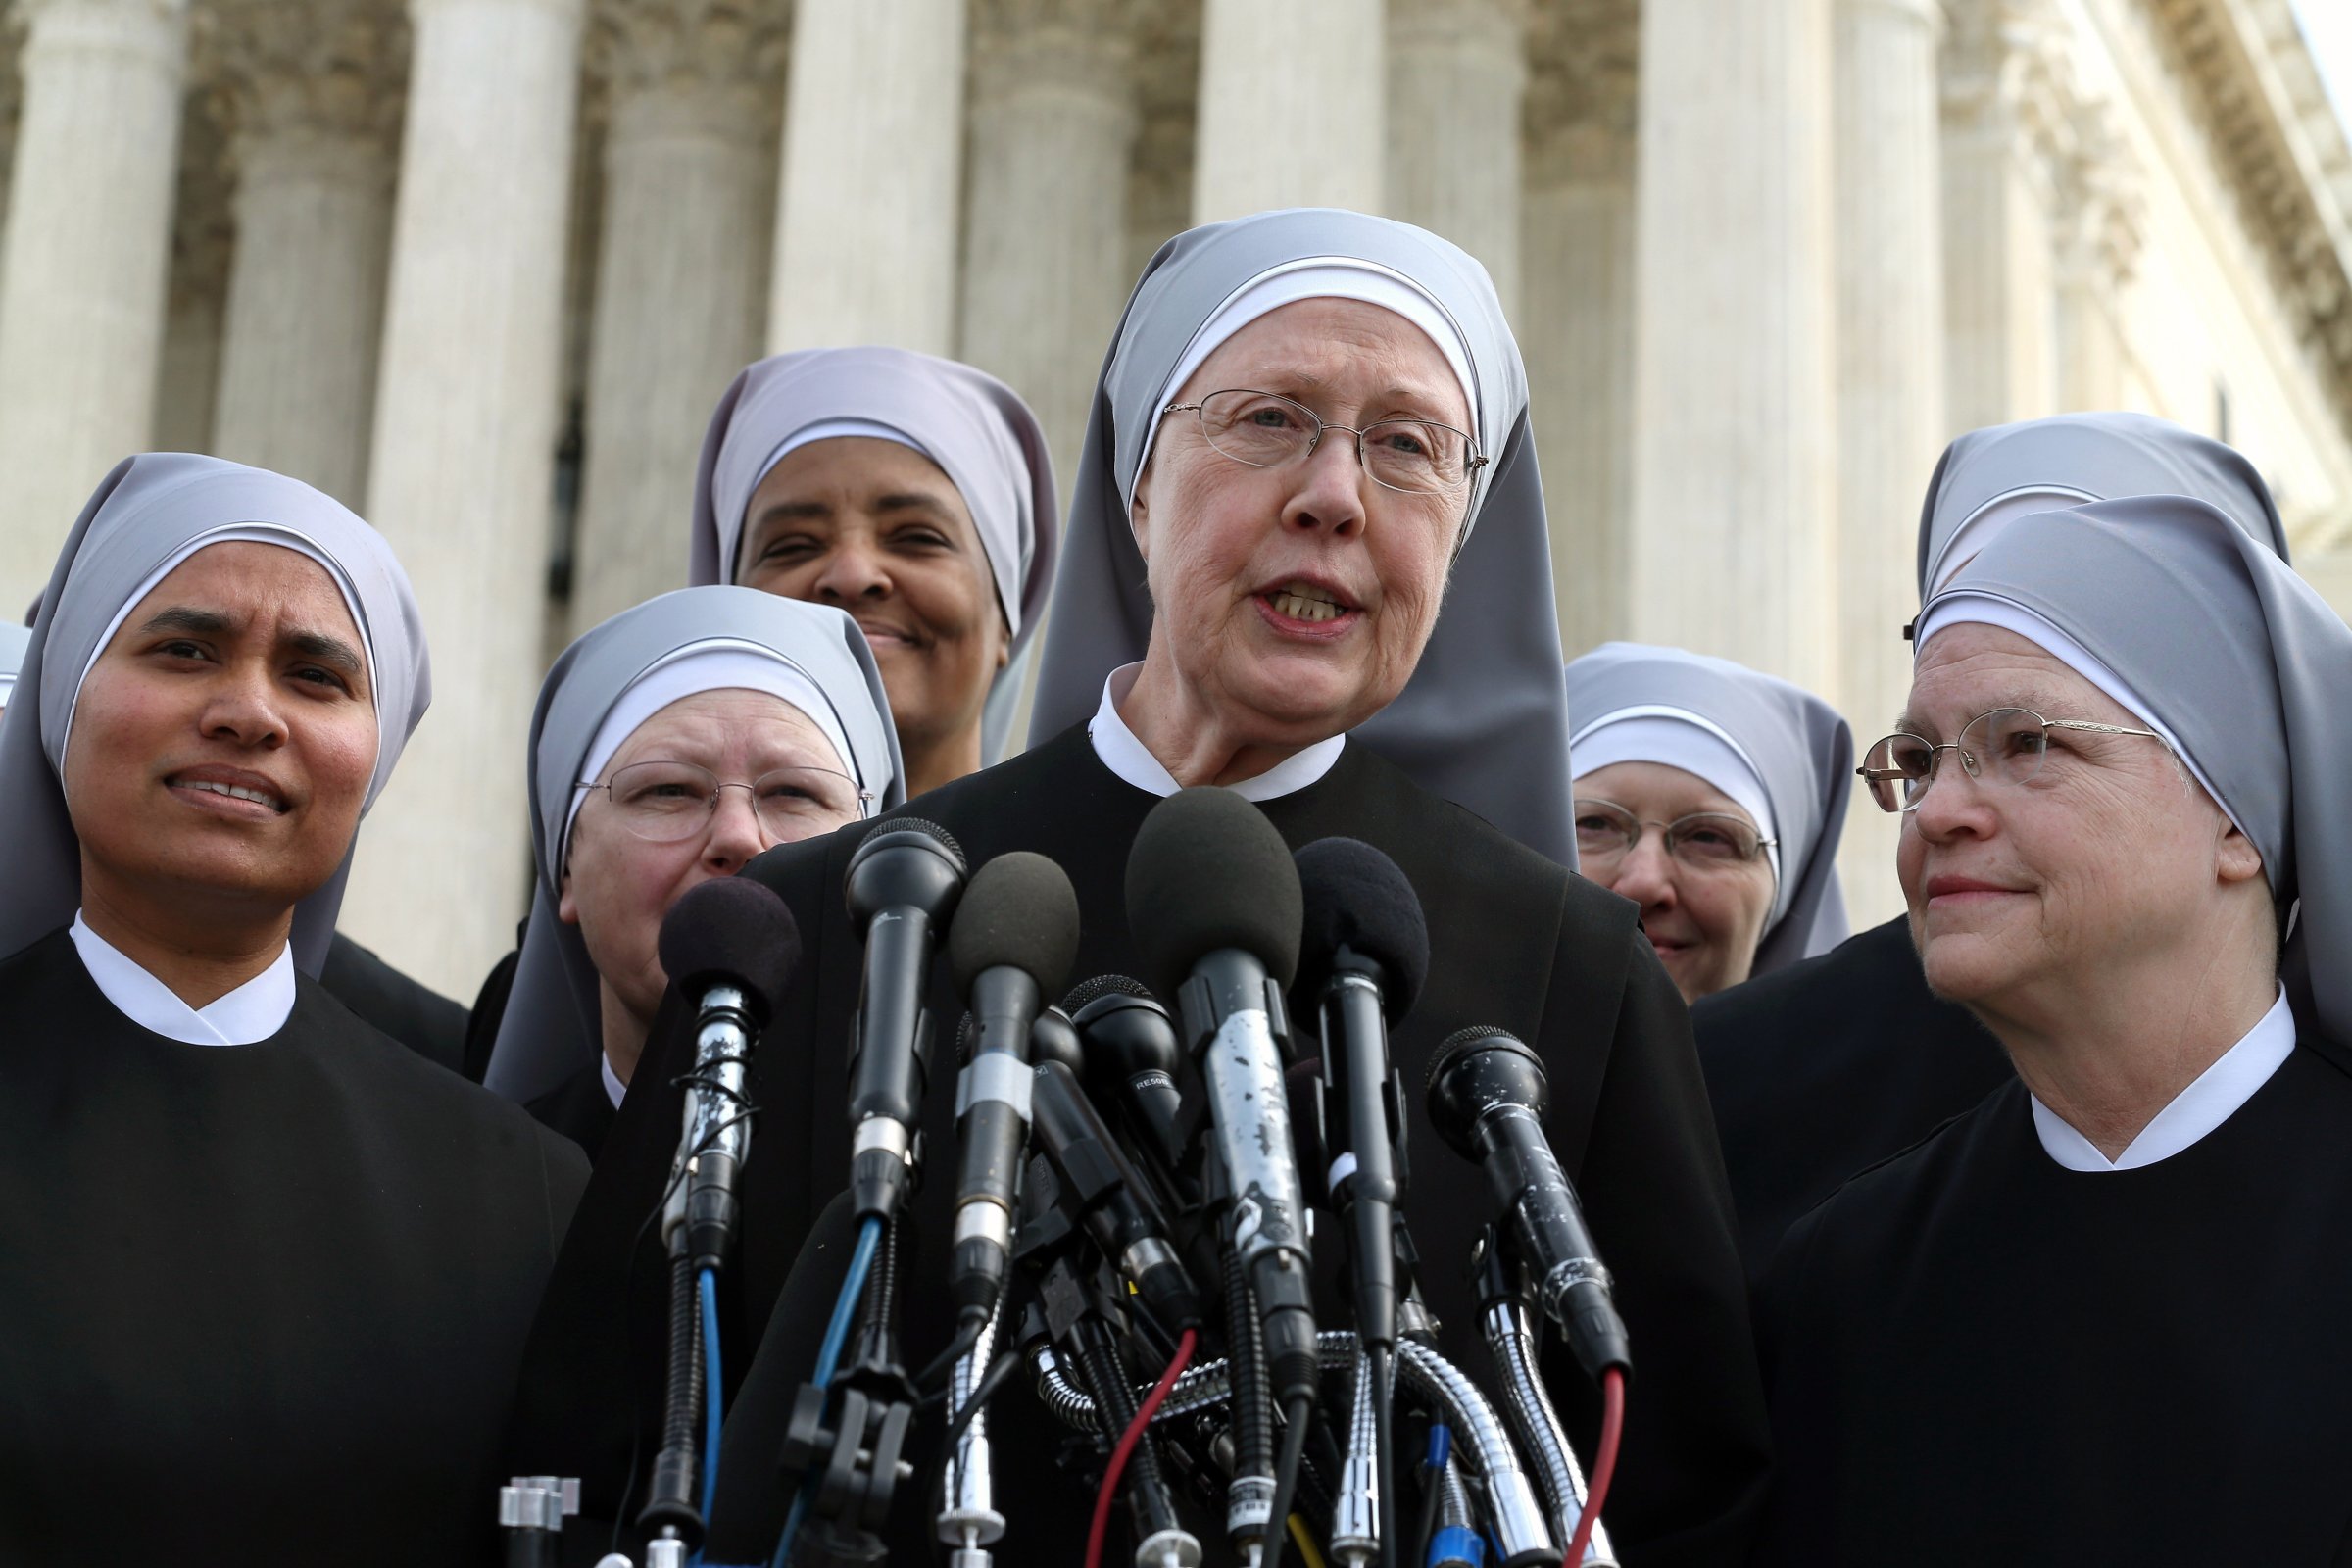 Mother Loraine Marie Maguire, (L), of the Little Sisters of the Poor, speaks to the media after arguments at the U.S. Supreme Court, in Washington, D.C., on March 23, 2016.